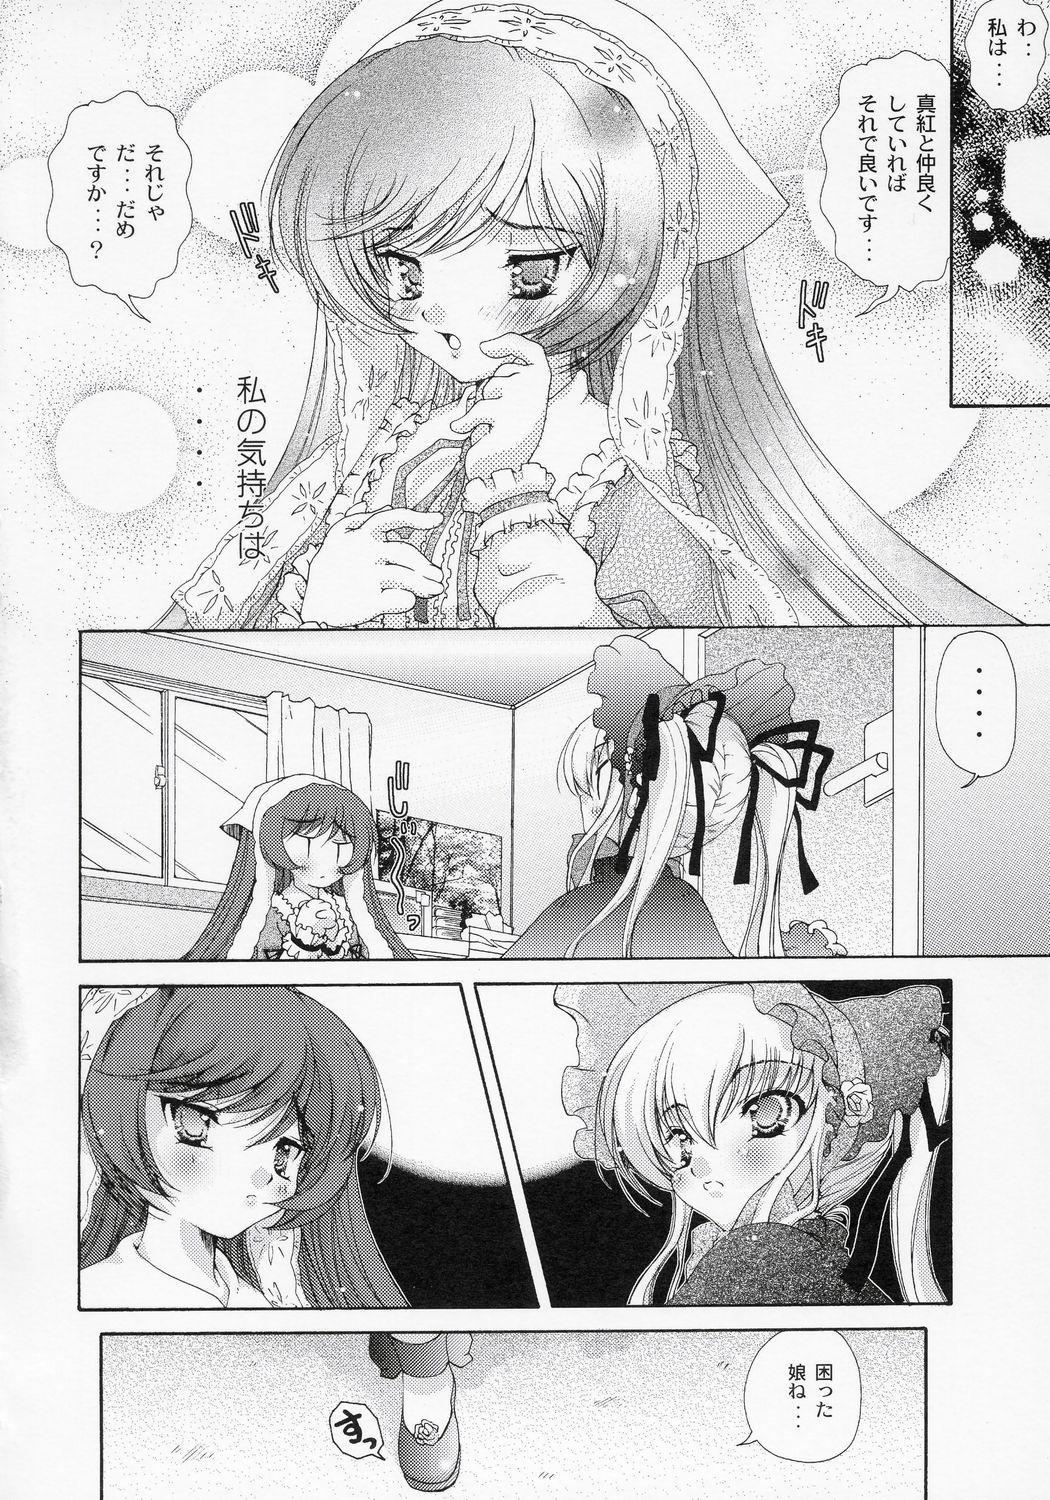 Awesome Dolls Party - Rozen maiden Porra - Page 7